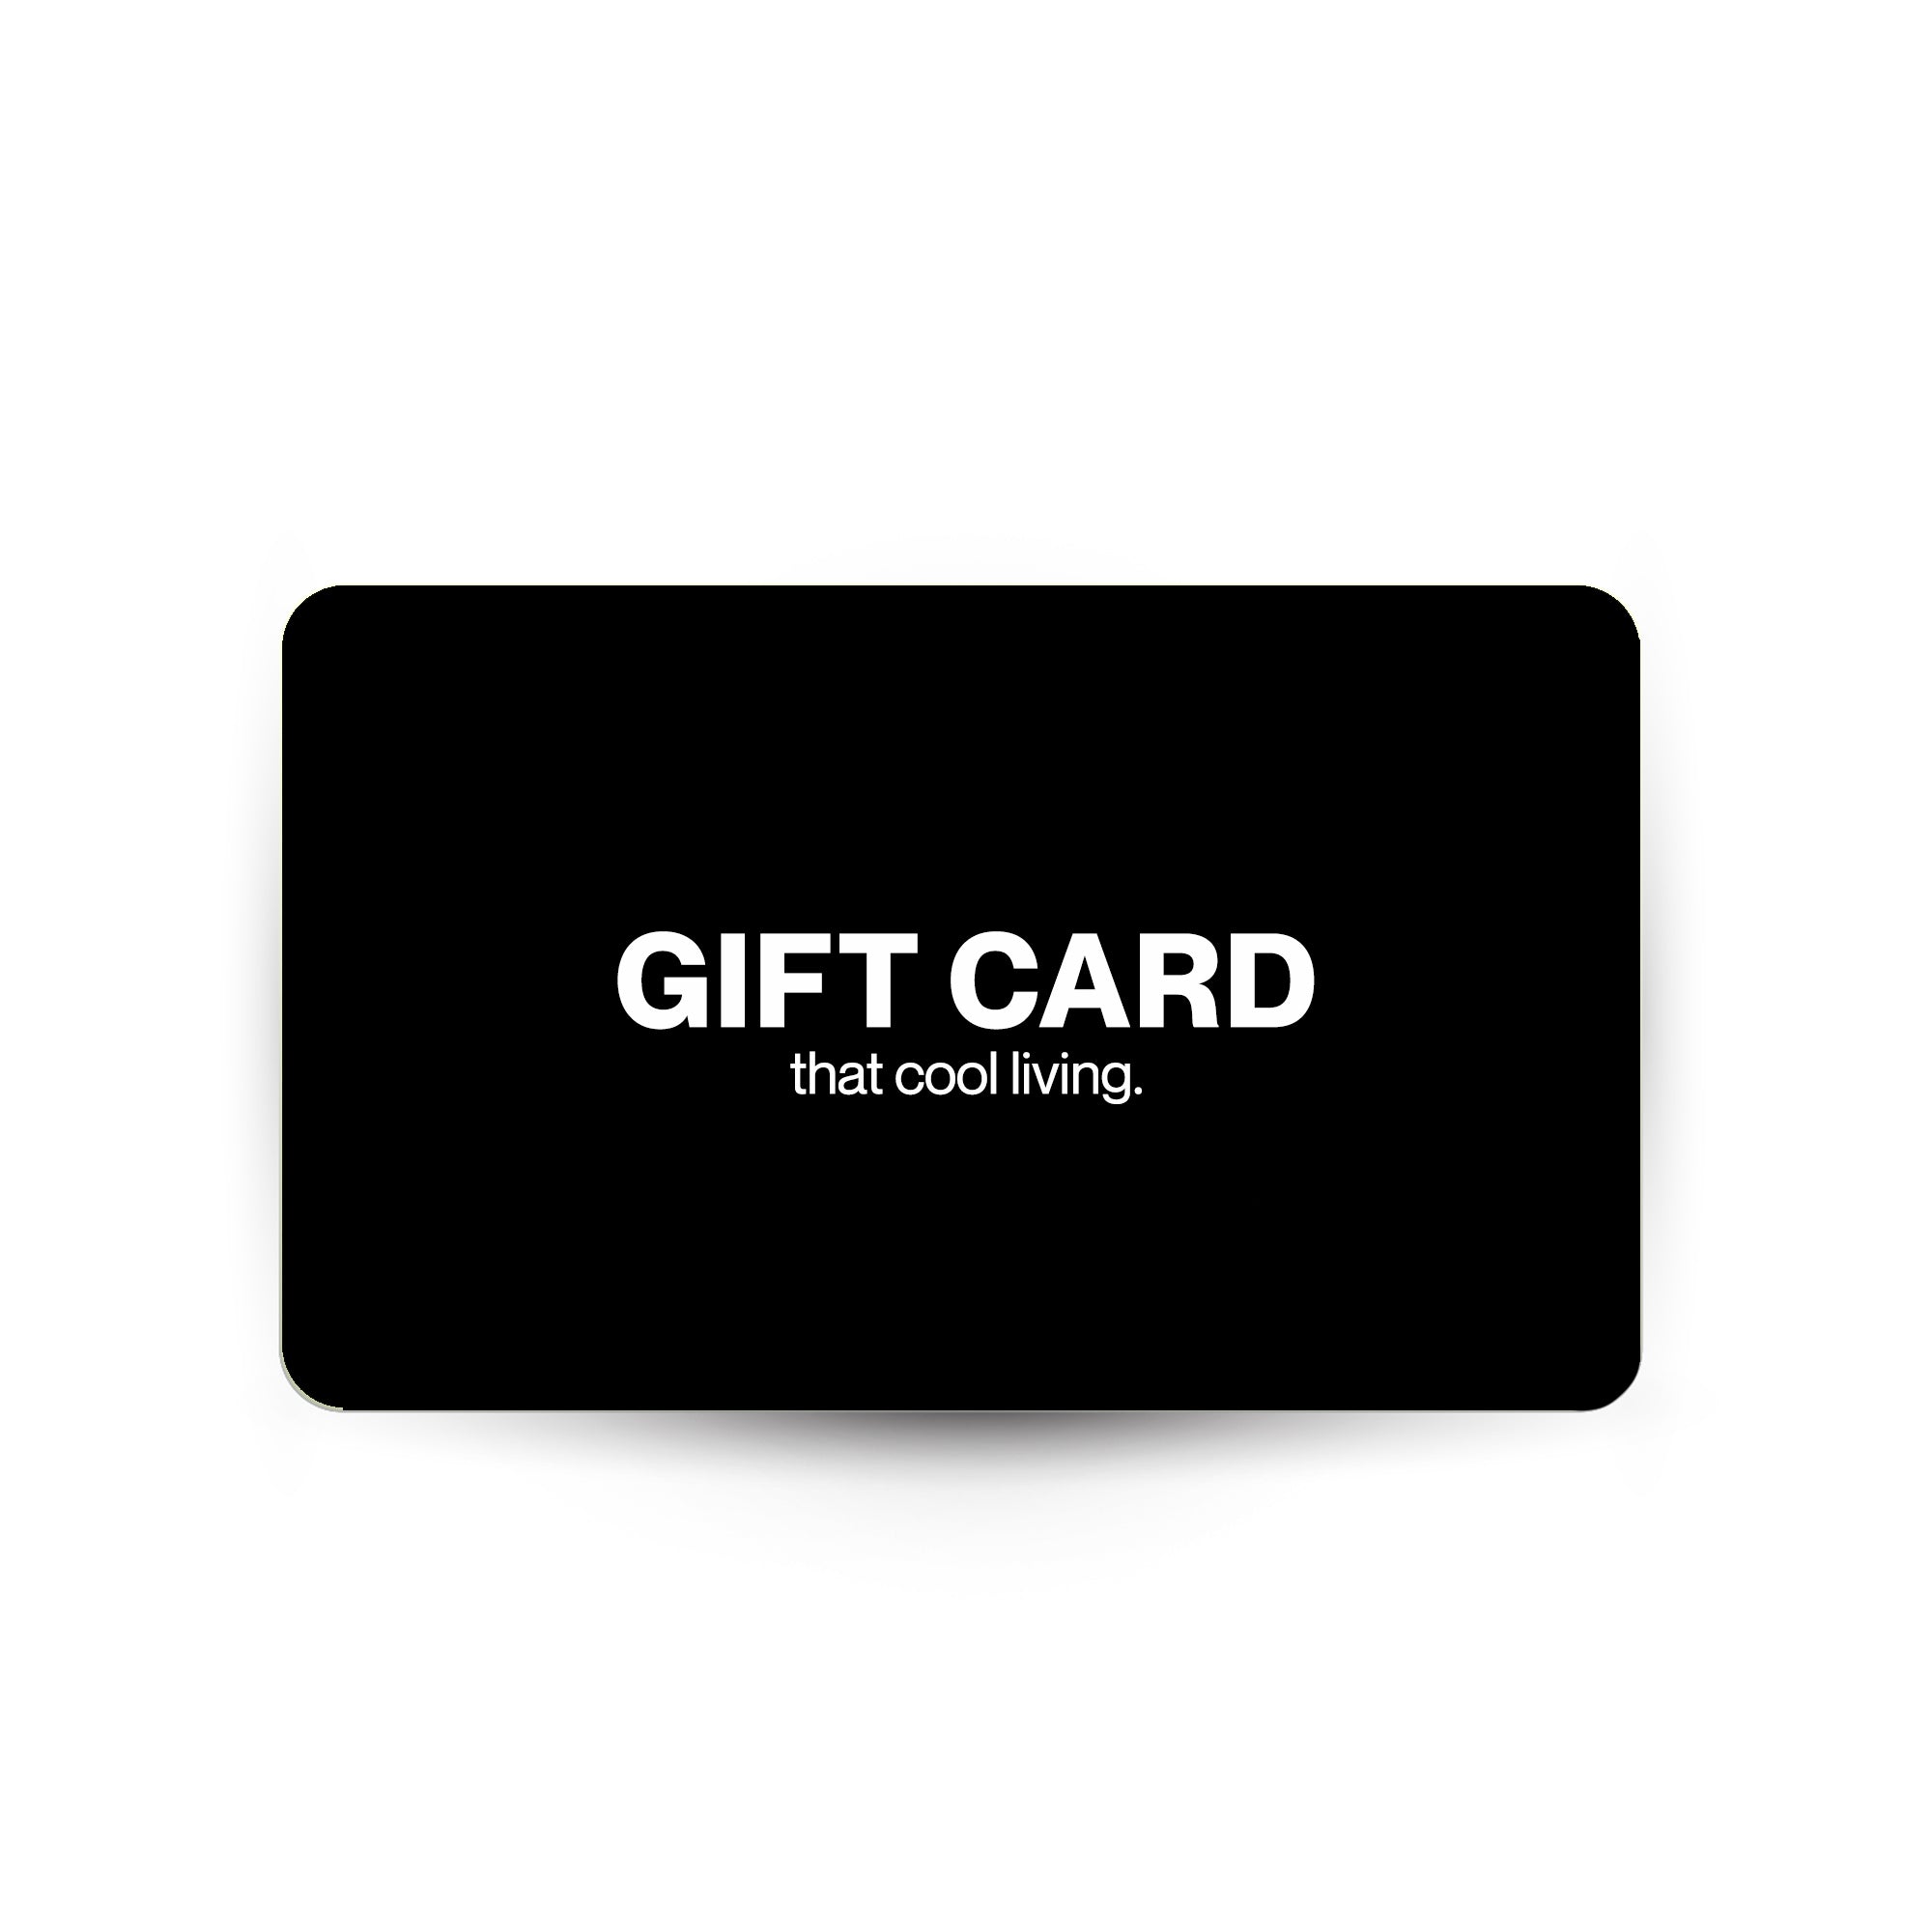 Gift Card - THAT COOL LIVING